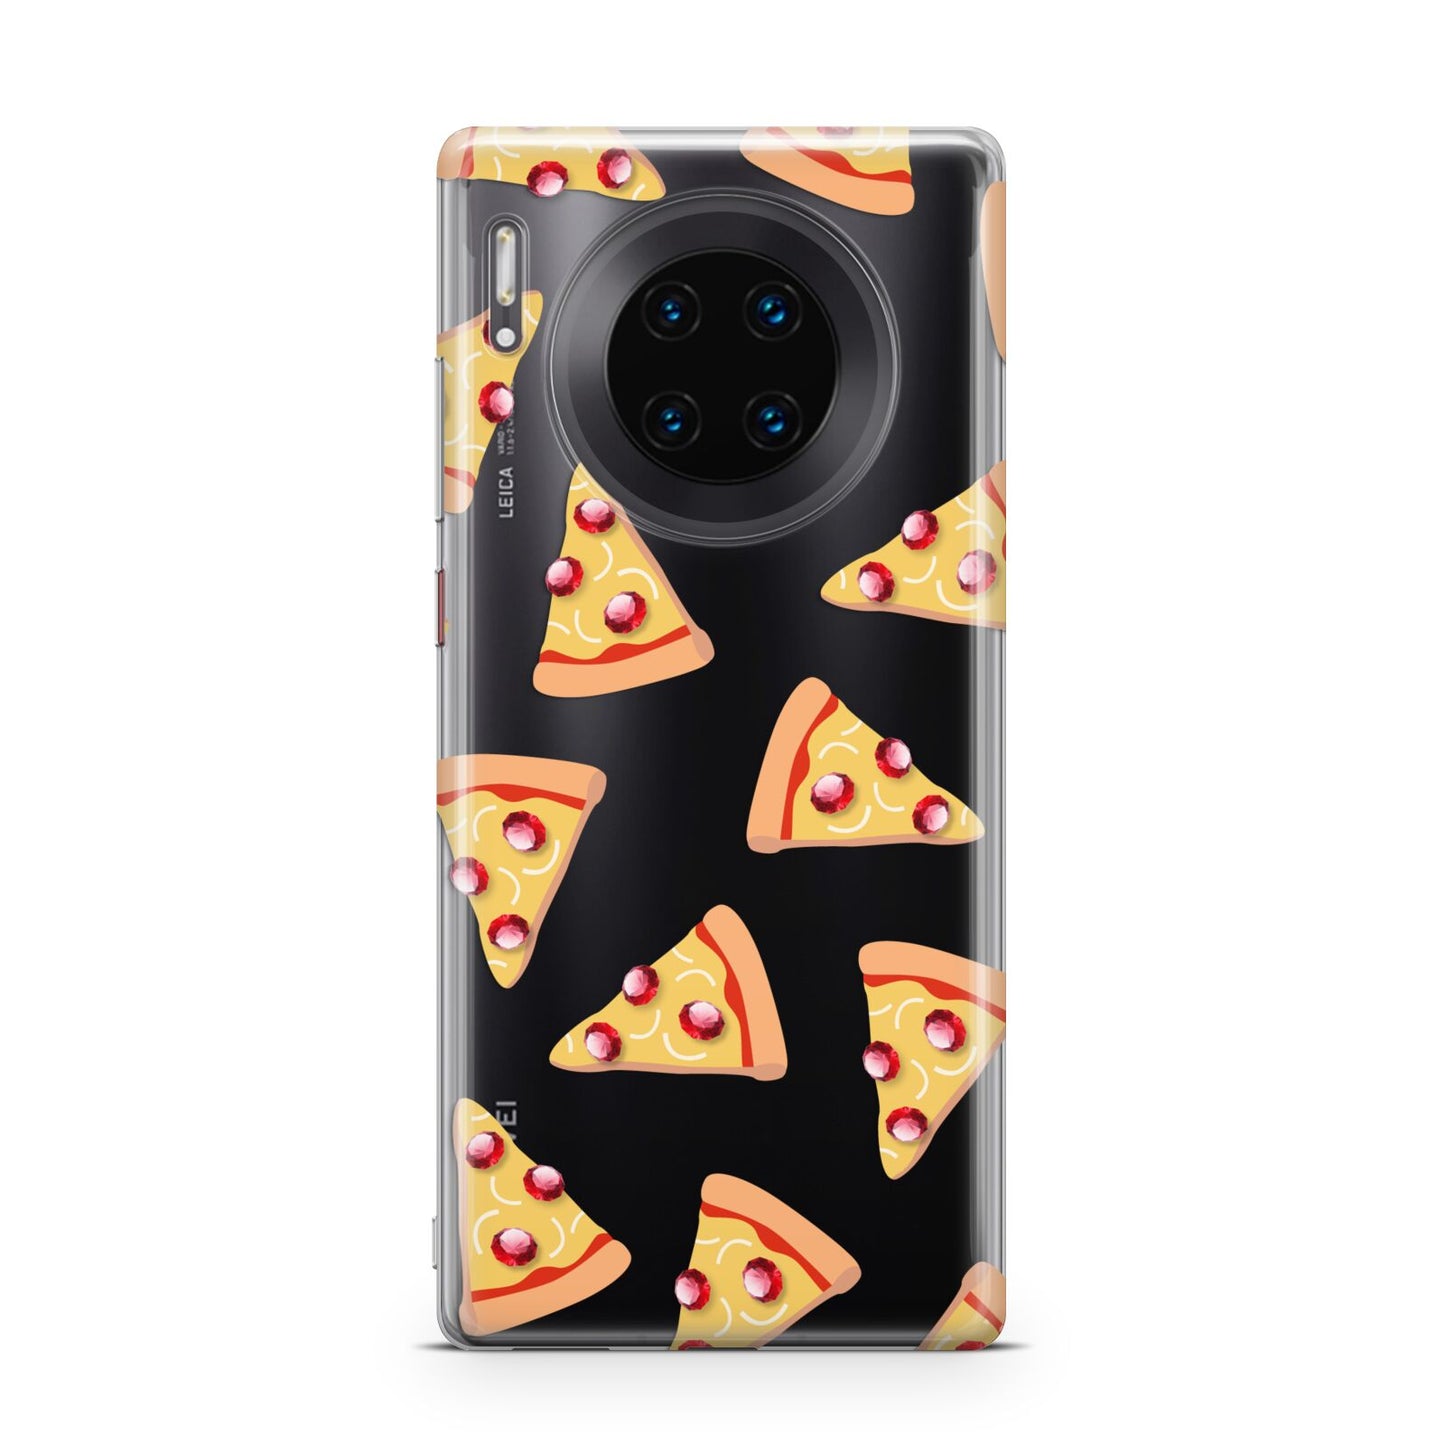 Rubies on Cartoon Pizza Slices Huawei Mate 30 Pro Phone Case